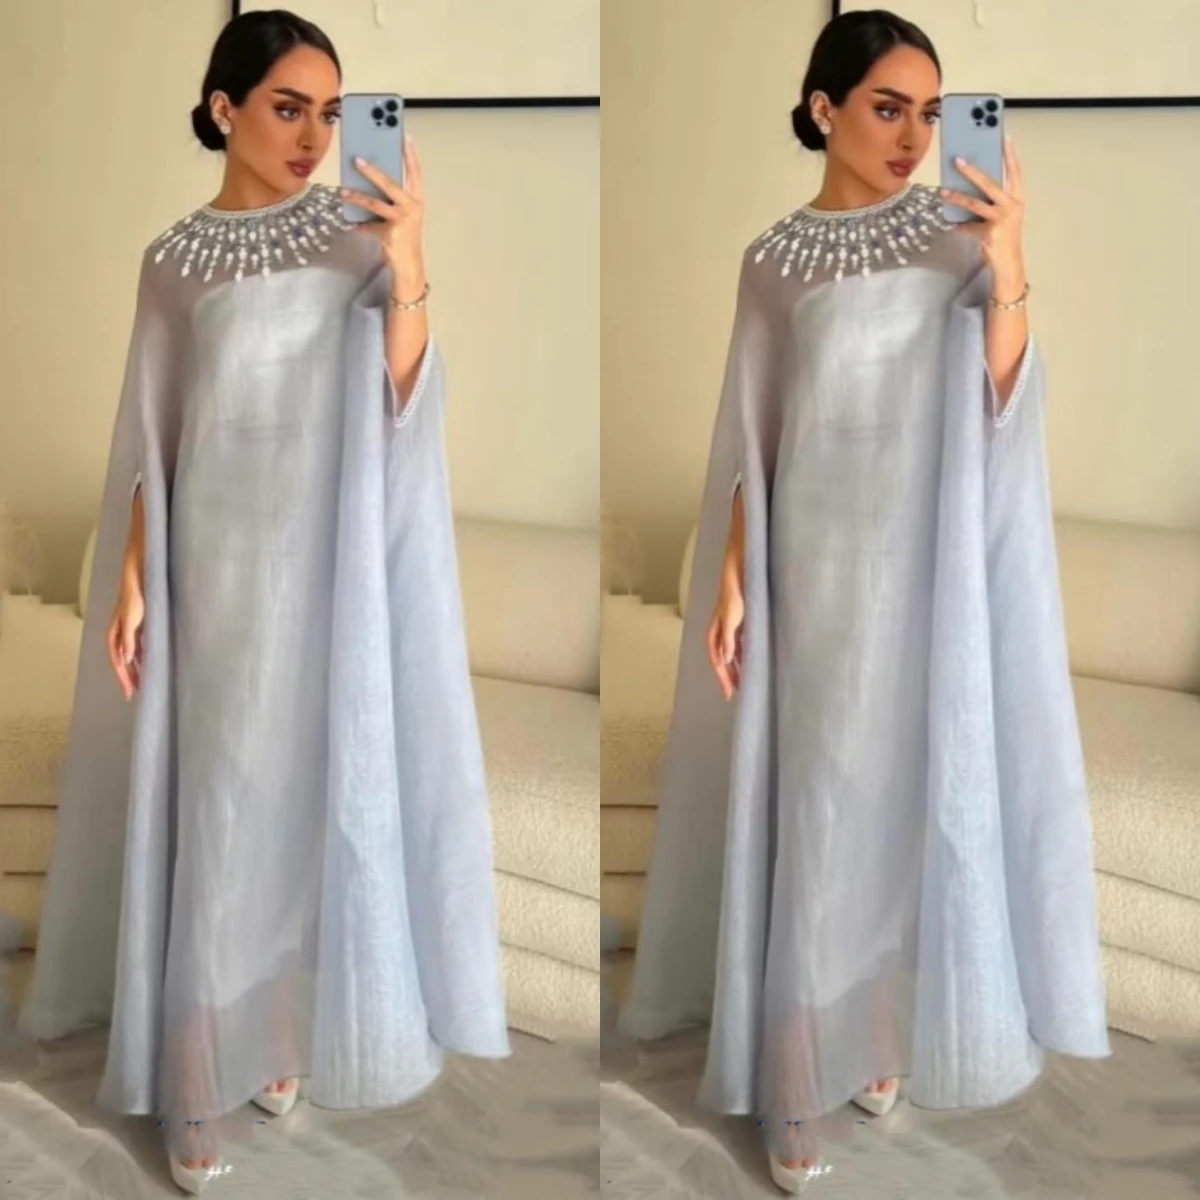 

Lovestory Saudi Arabia Dubai Women Wear Robe Prom Dresses Strapless Zipper Back Ankle Length Evening Party Gowns with Overskirts